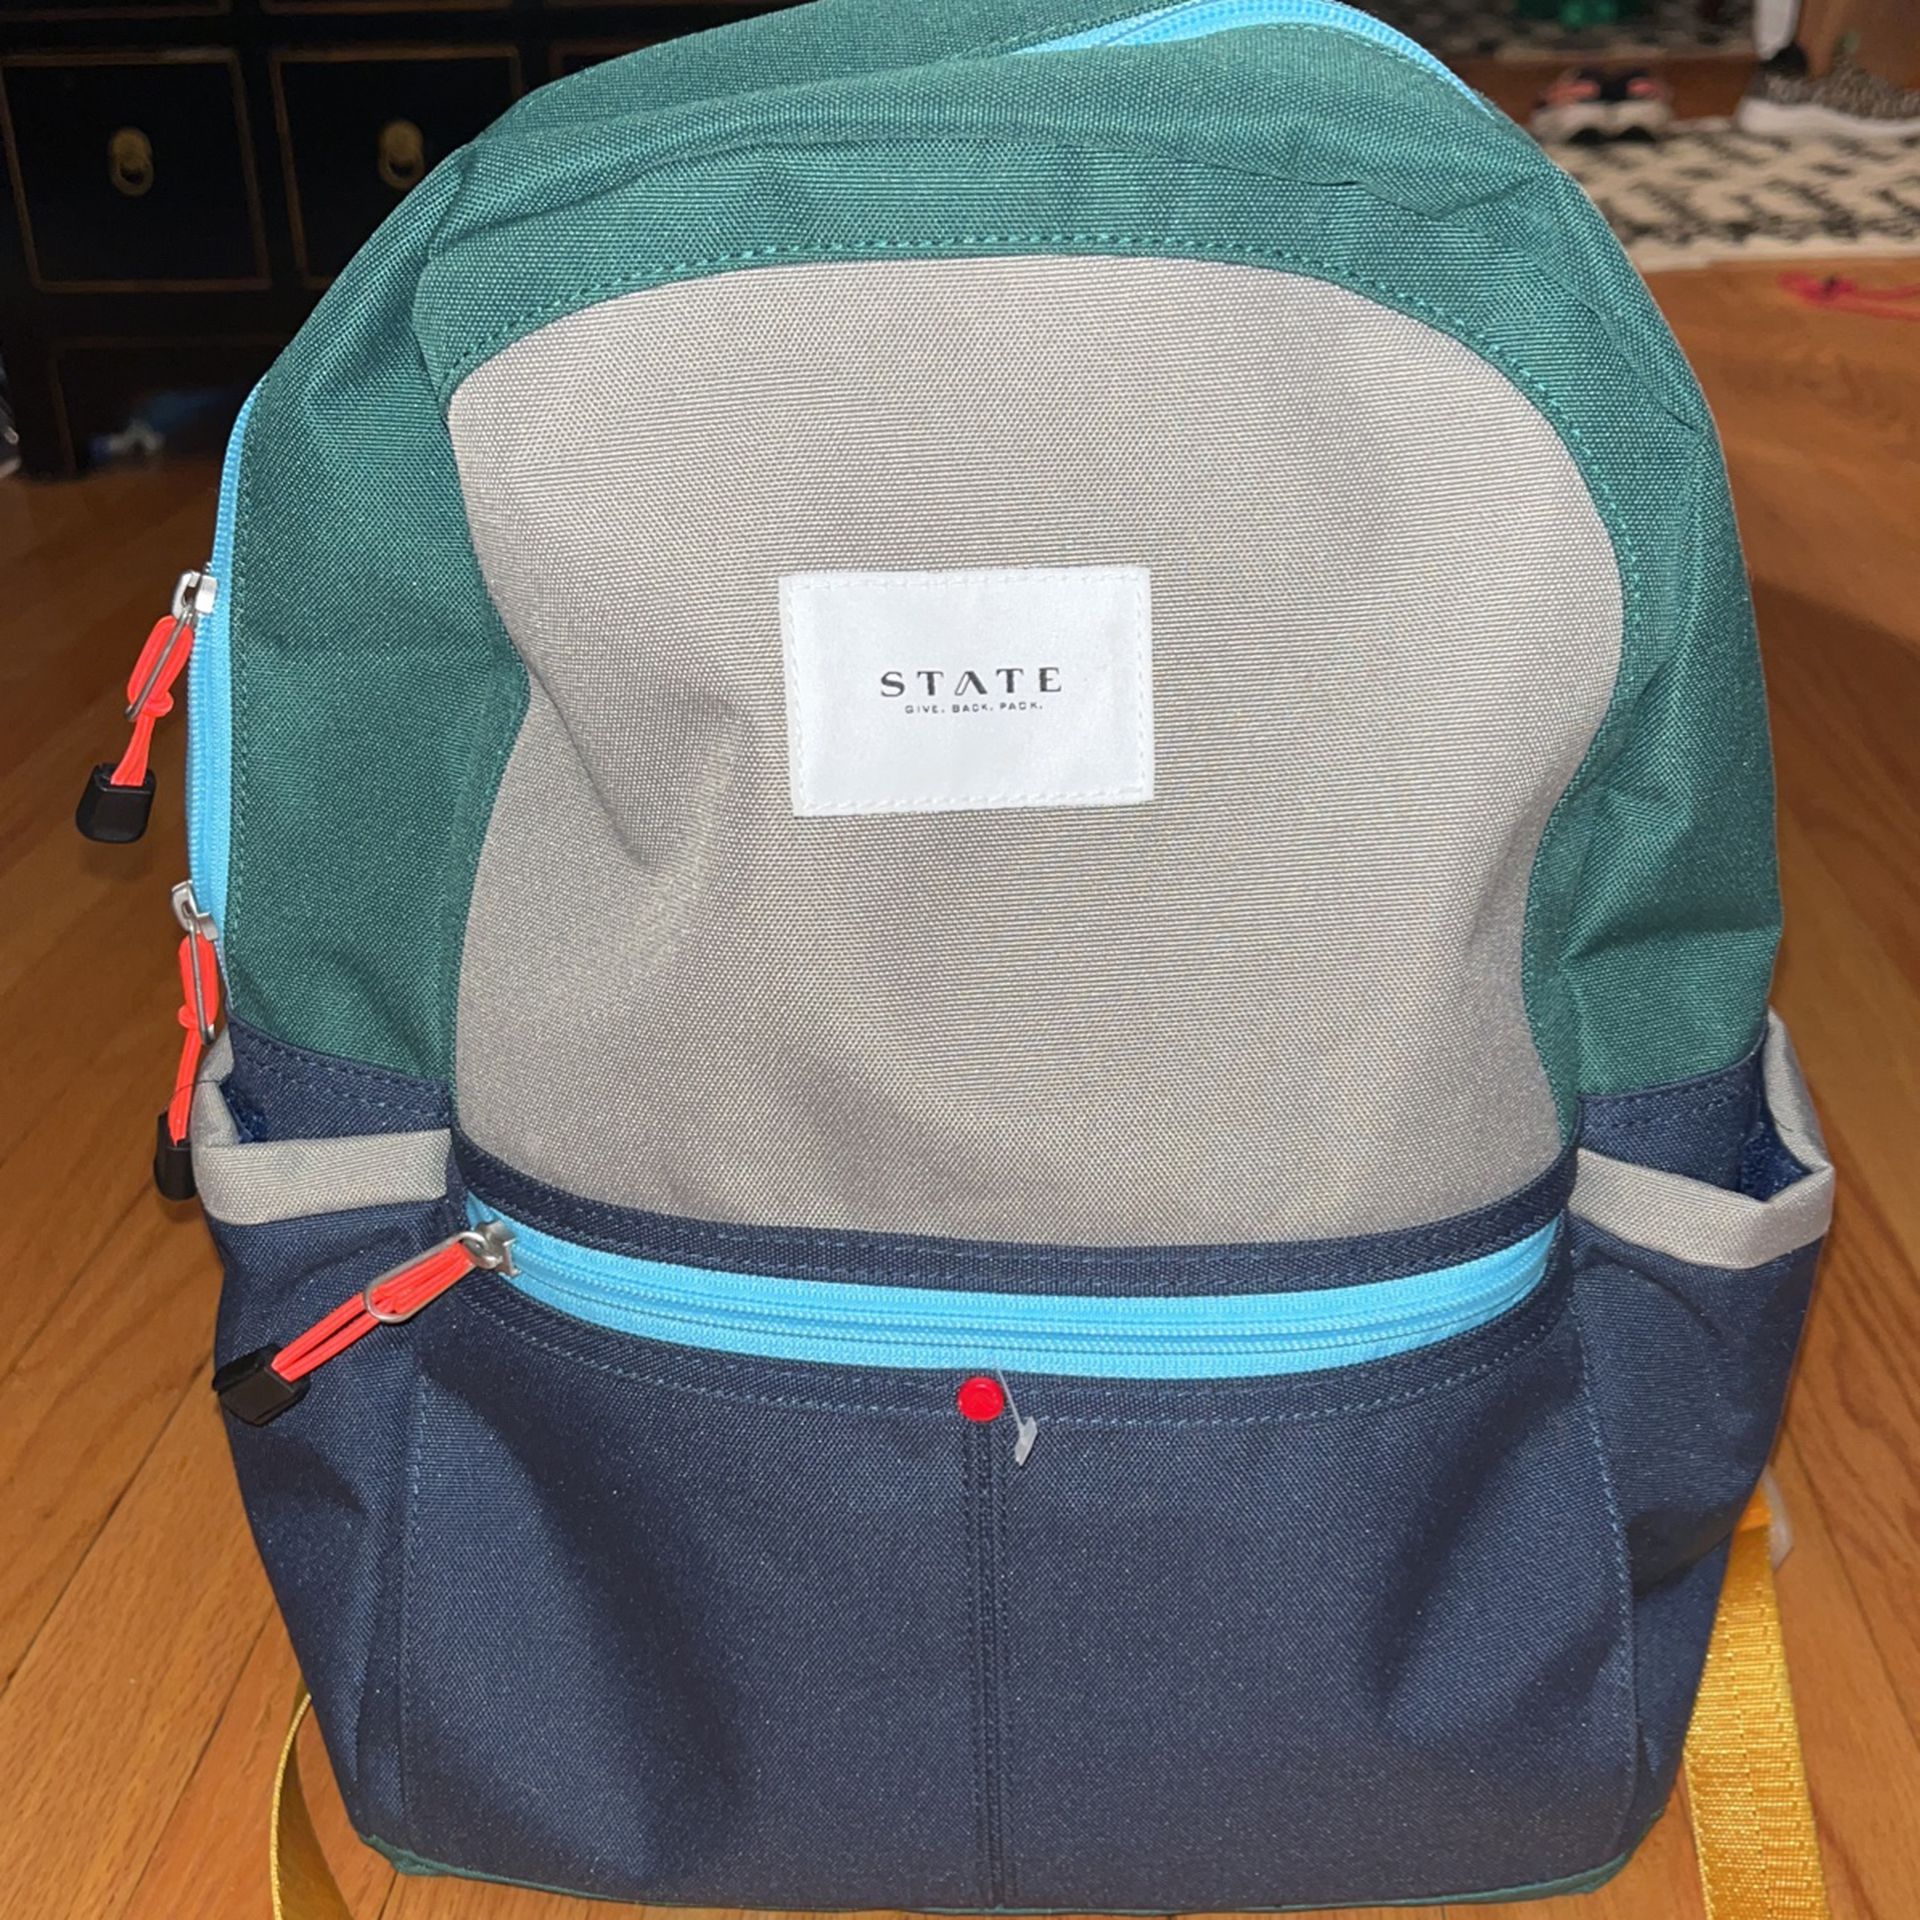 STATE Backpack 